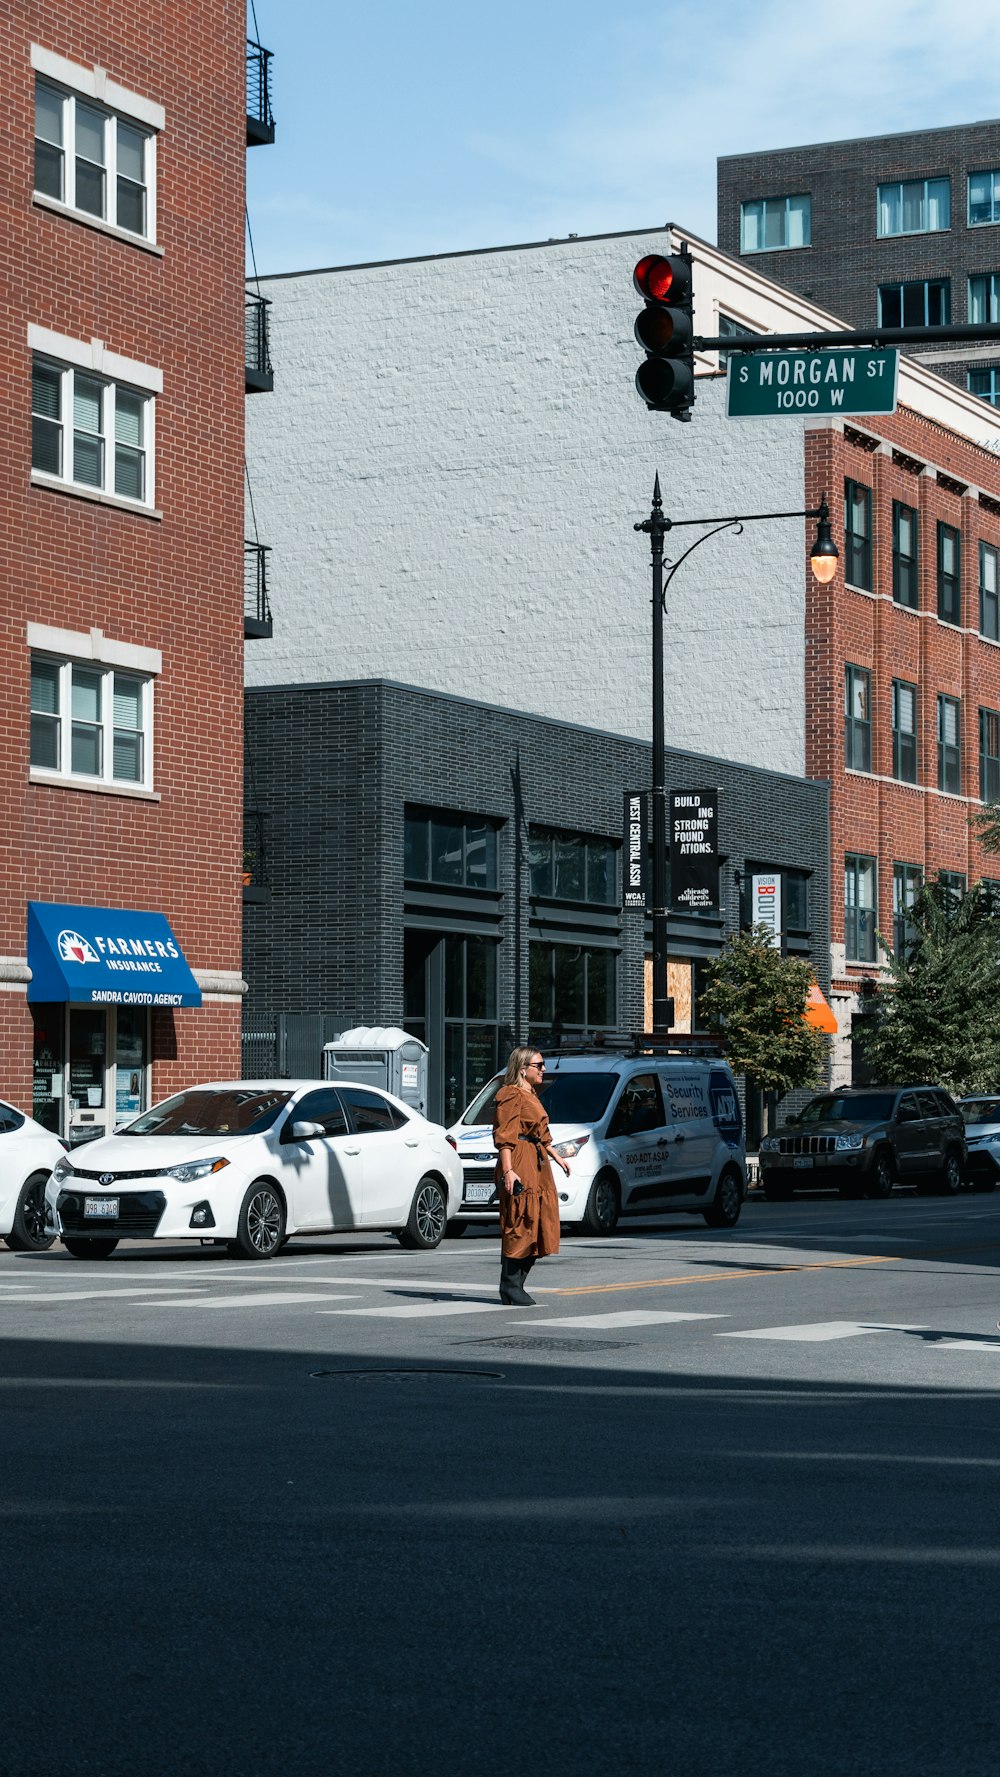 a person crossing a street at a traffic light